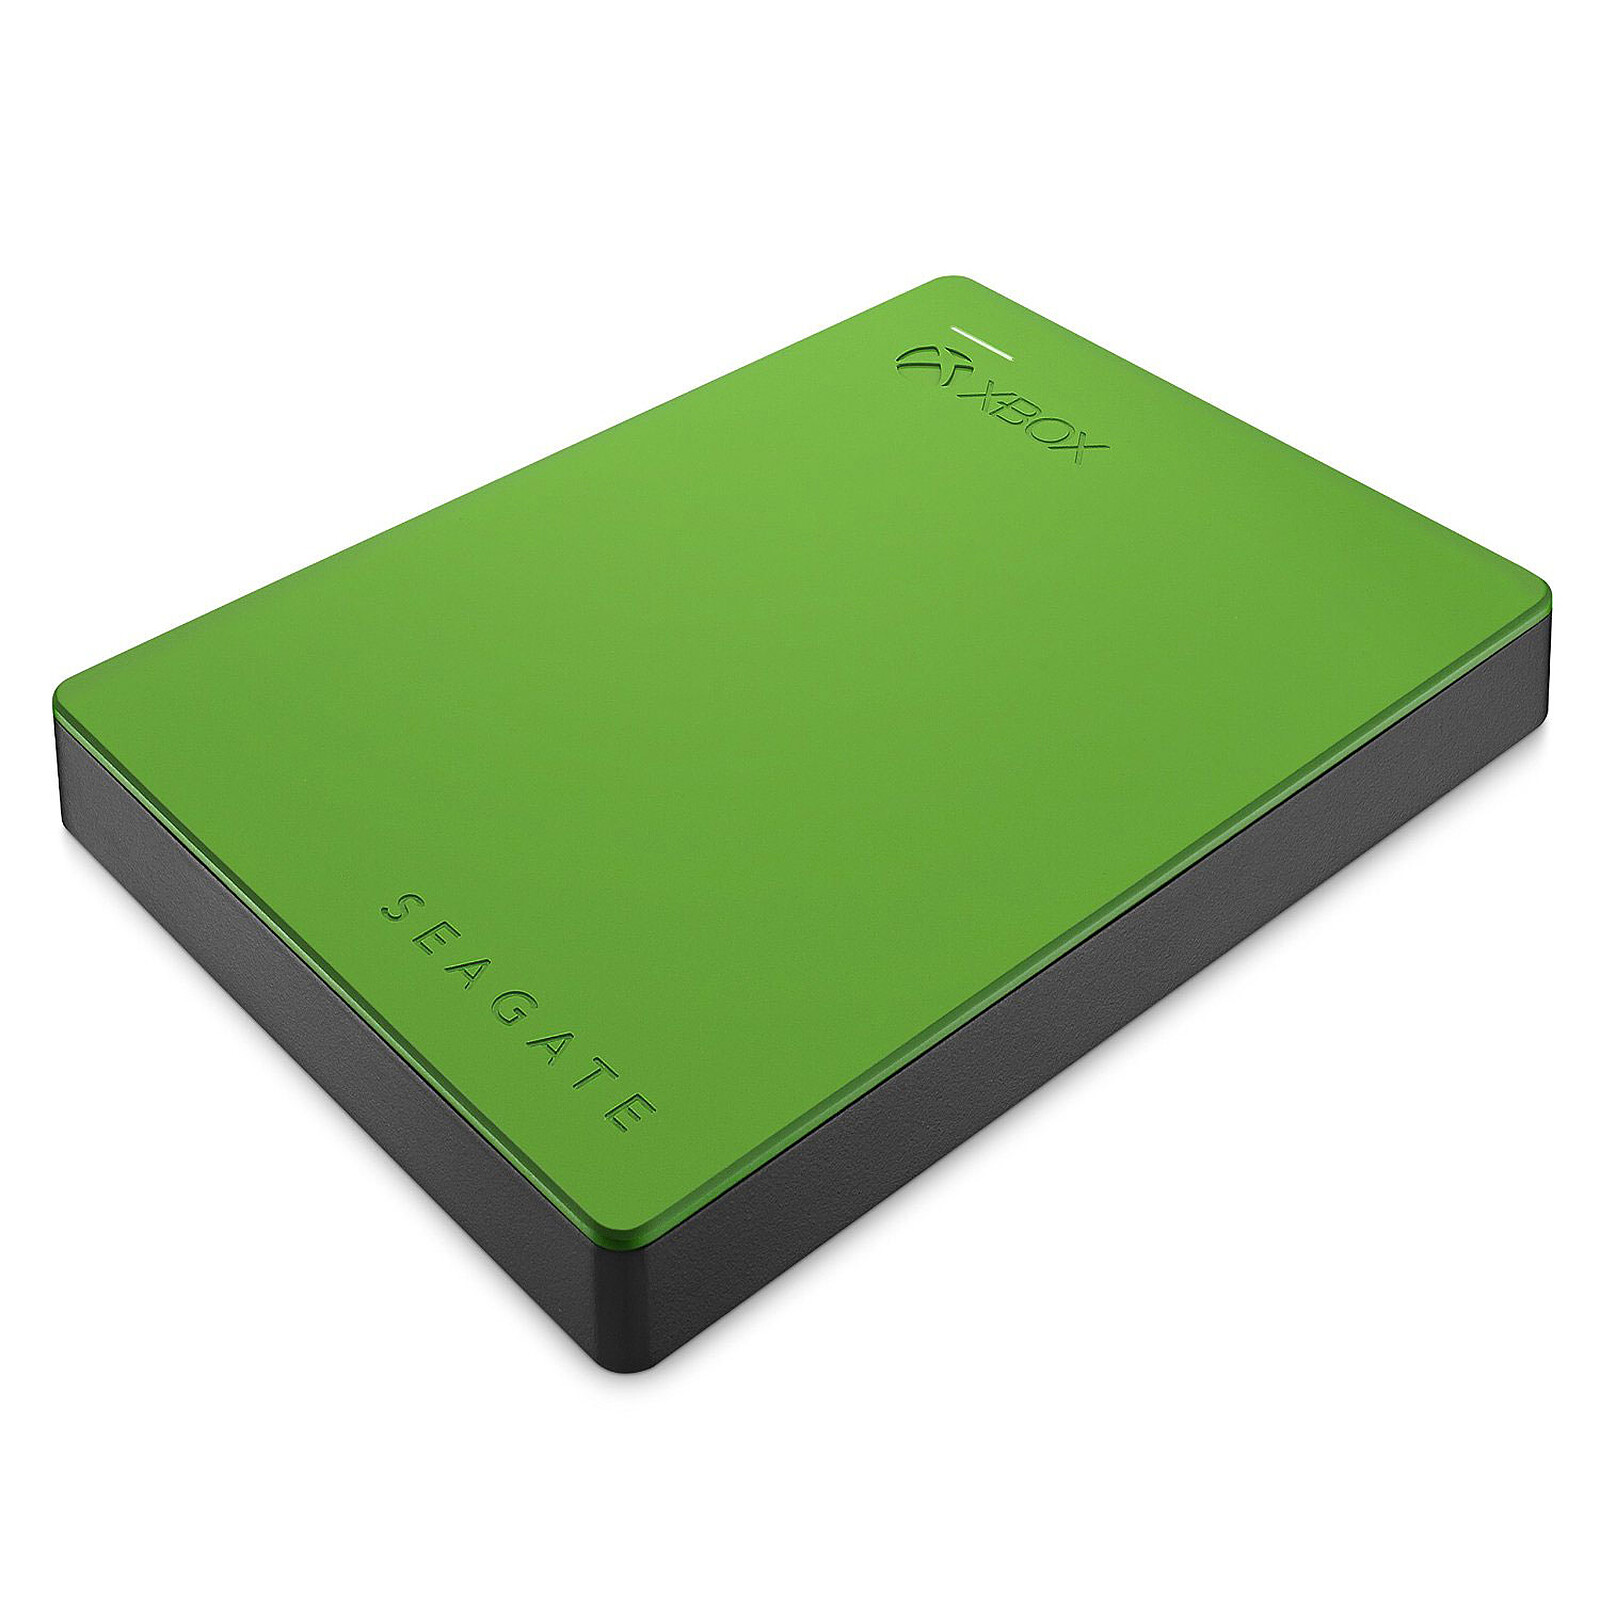 Seagate Game Drive 4Tb Green - Xbox One accessories - LDLC 3-year warranty